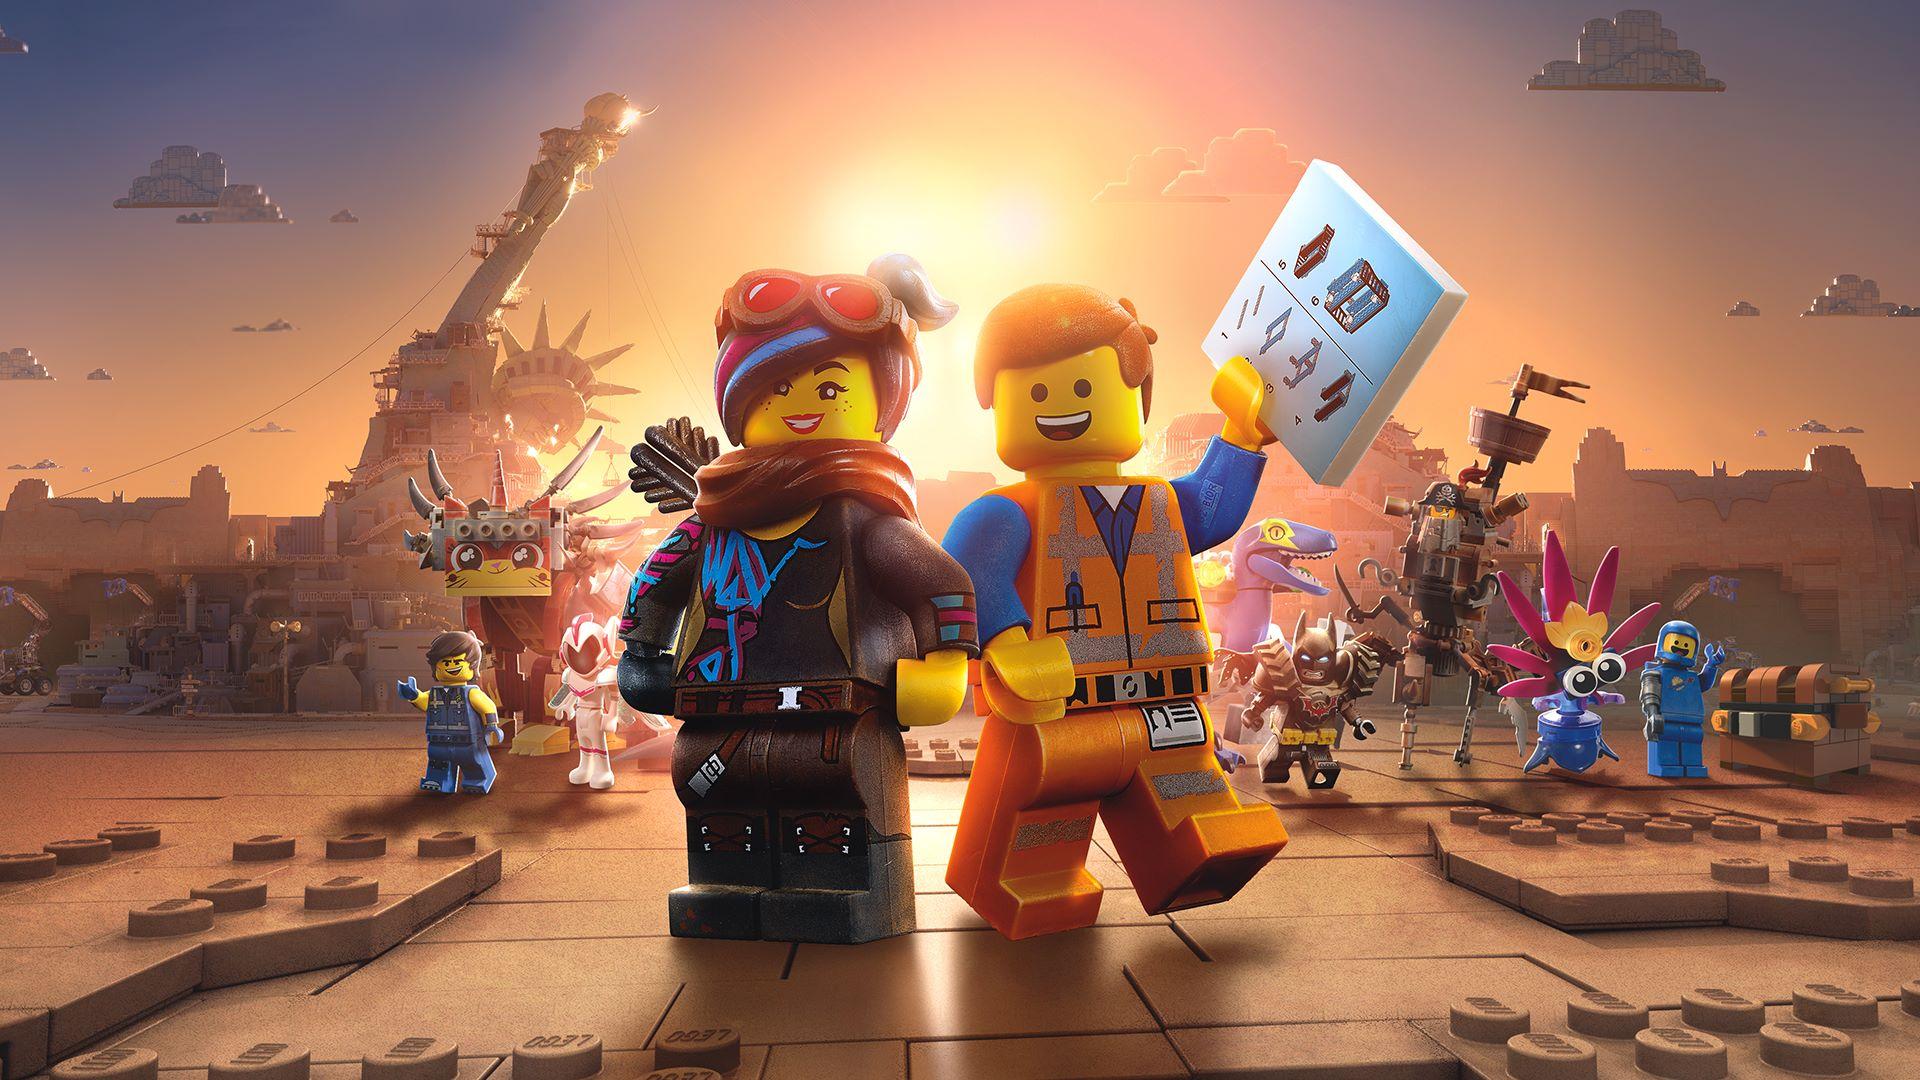 The Lego Movie 2 Wallpaper 66924 1920x1080px